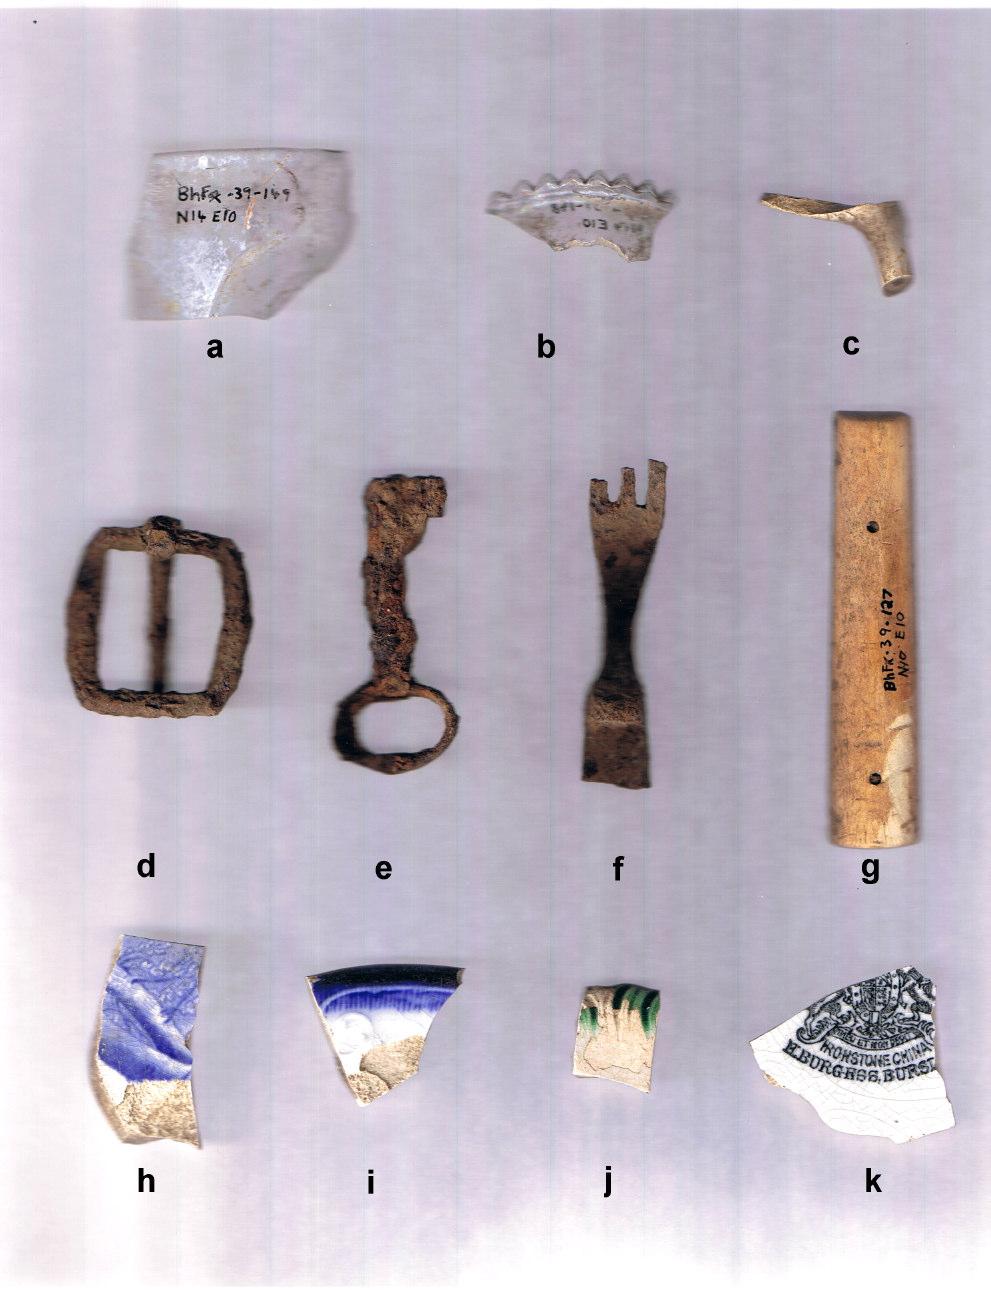 Plate 10: Representative Stage 3 Artifacts from Gourley Site (BhFx-39) a, glass tumbler rim fragment, BhFx-39-149, N14E10 b, clear glass crenellated lantern rim, BhFx-39-148, N14 E10 c, clay pipe